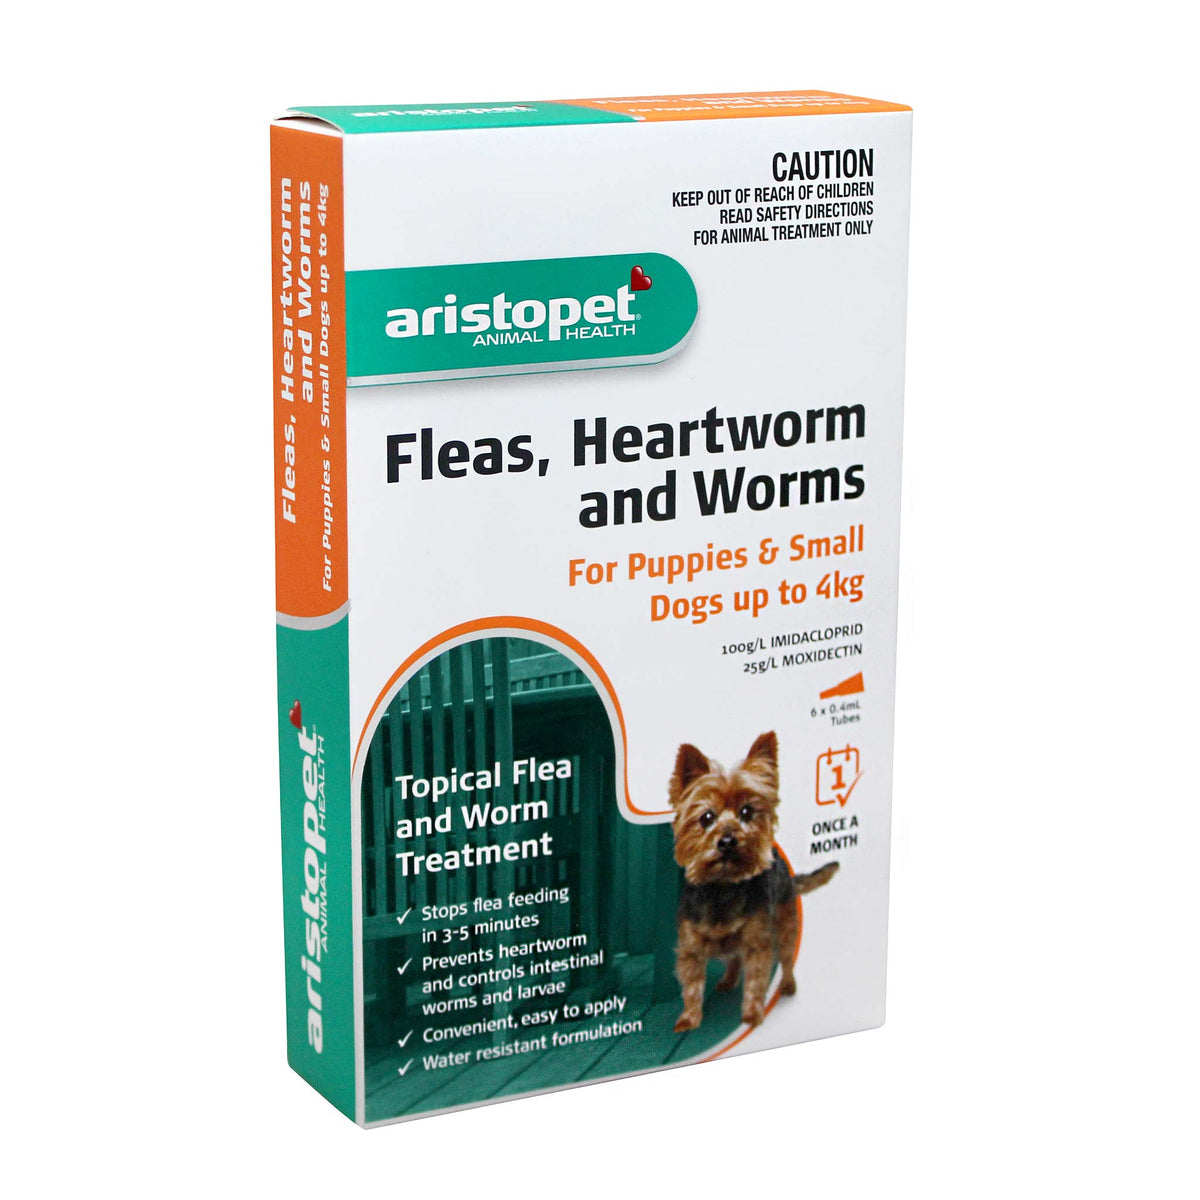 Aristopet Fleas, Heartworm &amp; Worms Spot-on Treatment for Puppies &amp; Small Dogs up to 4kg